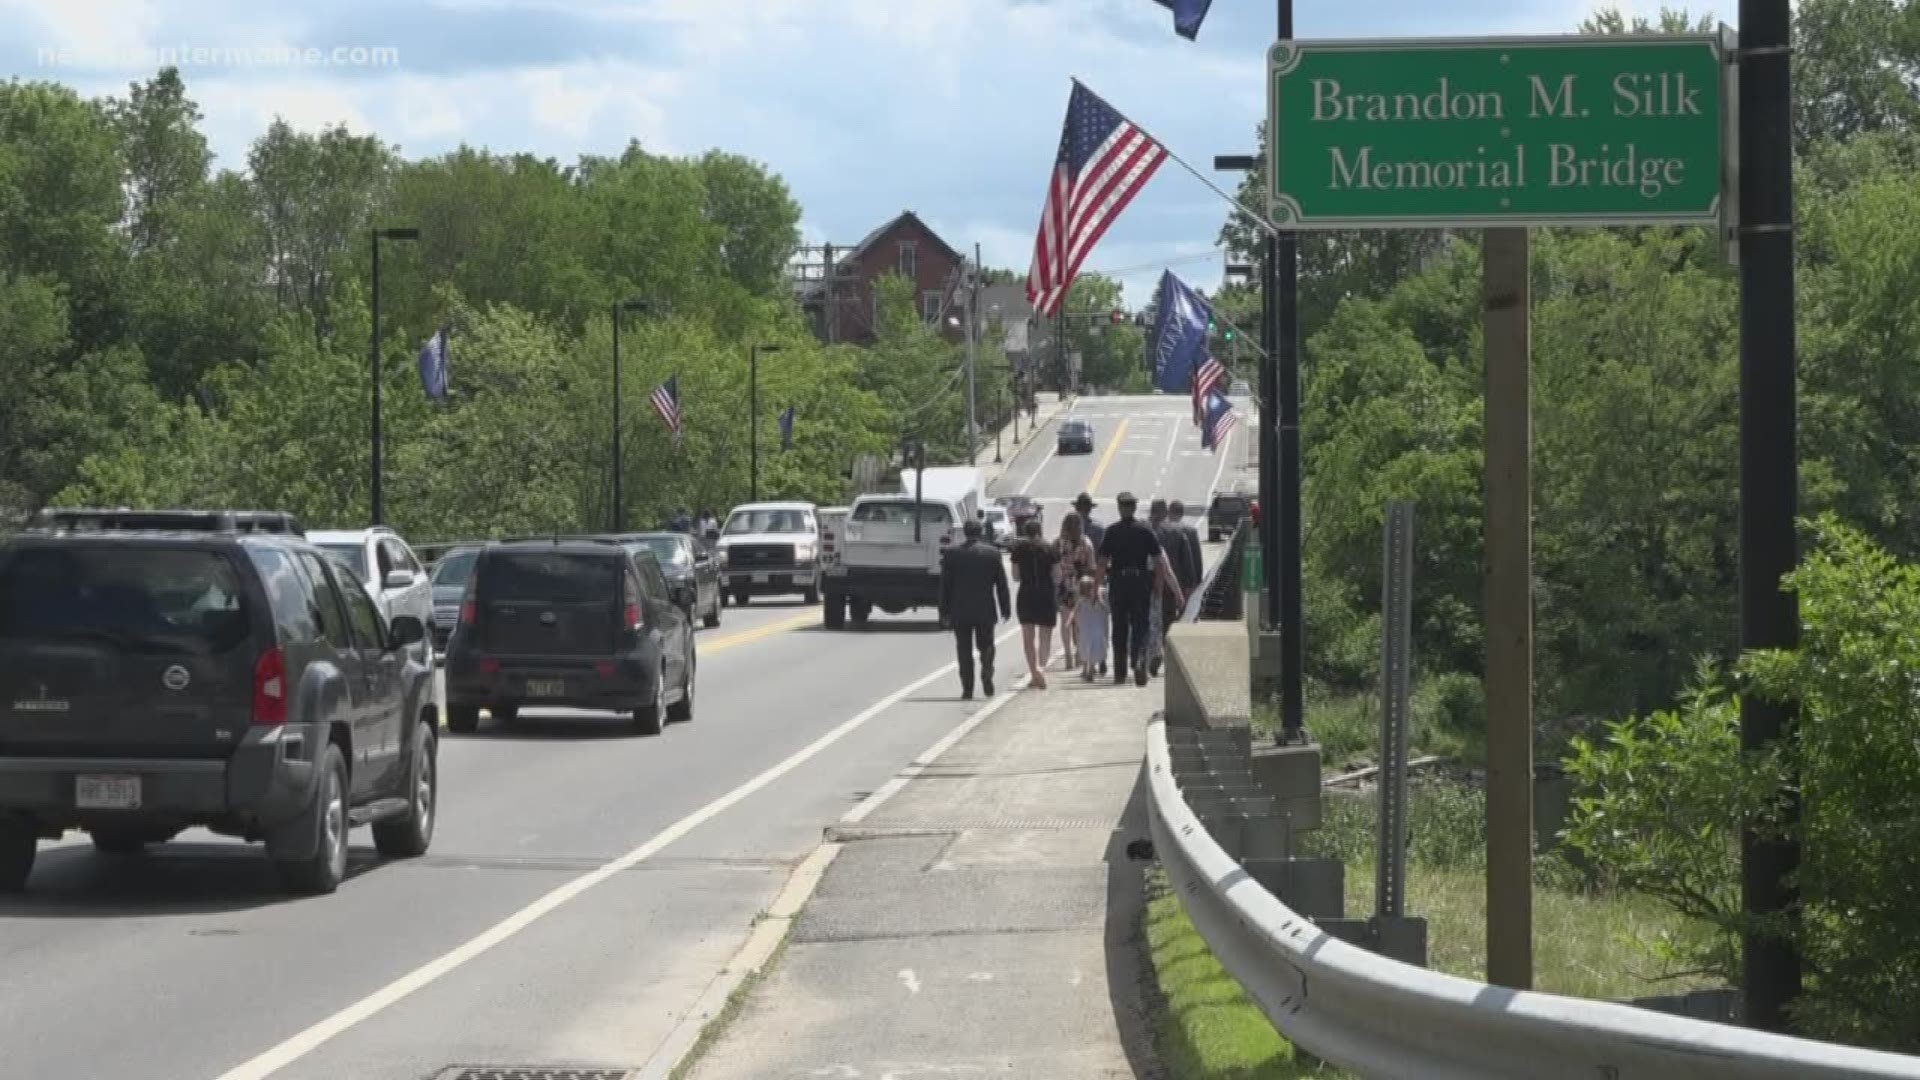 A bridge in Orono was dedicated Friday to veteran Sergeant Brandon Silk, who was serving in Afghanistan when he died in June 2010.